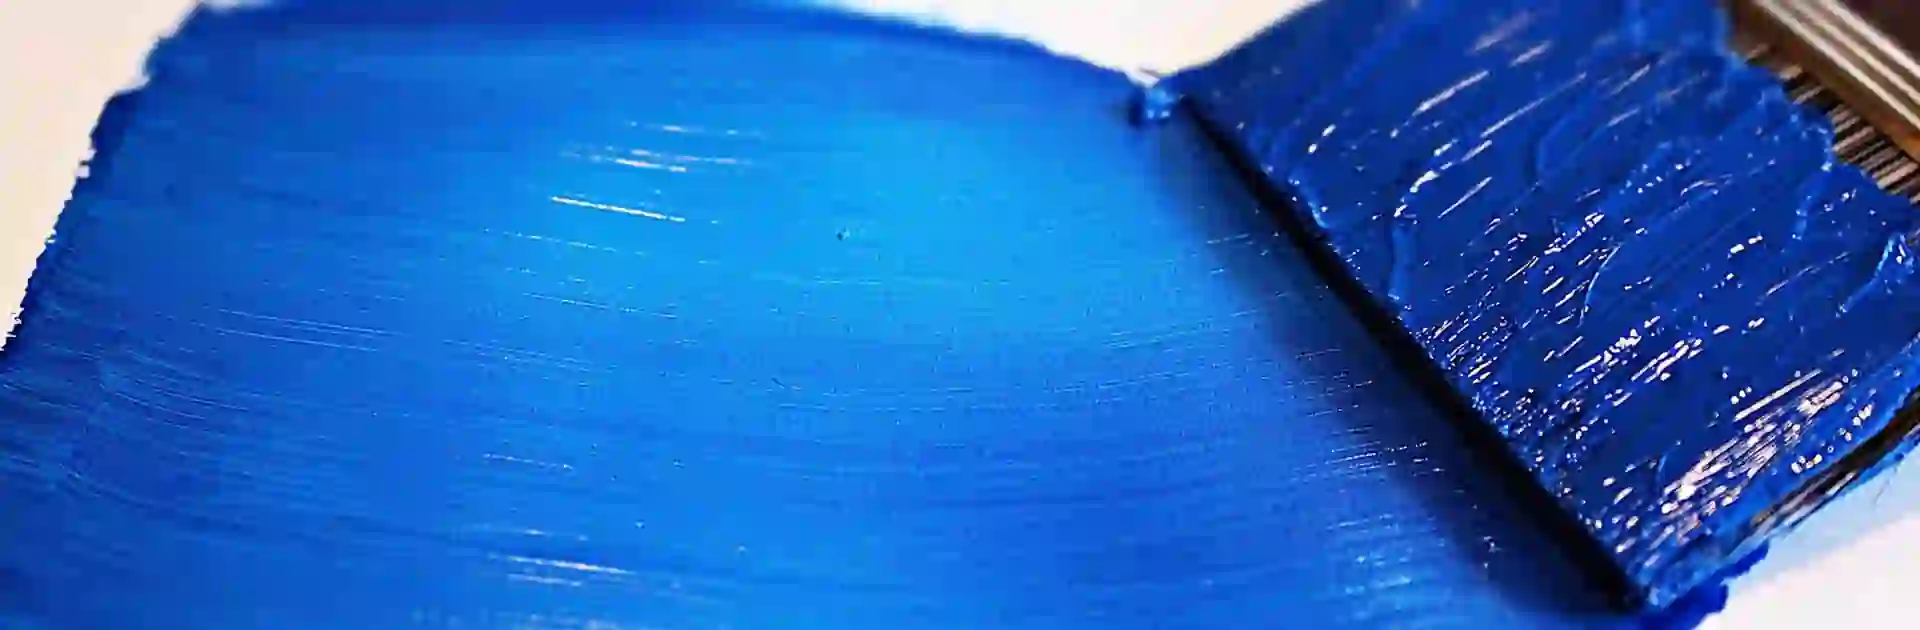 blue paint stroke and paint brush